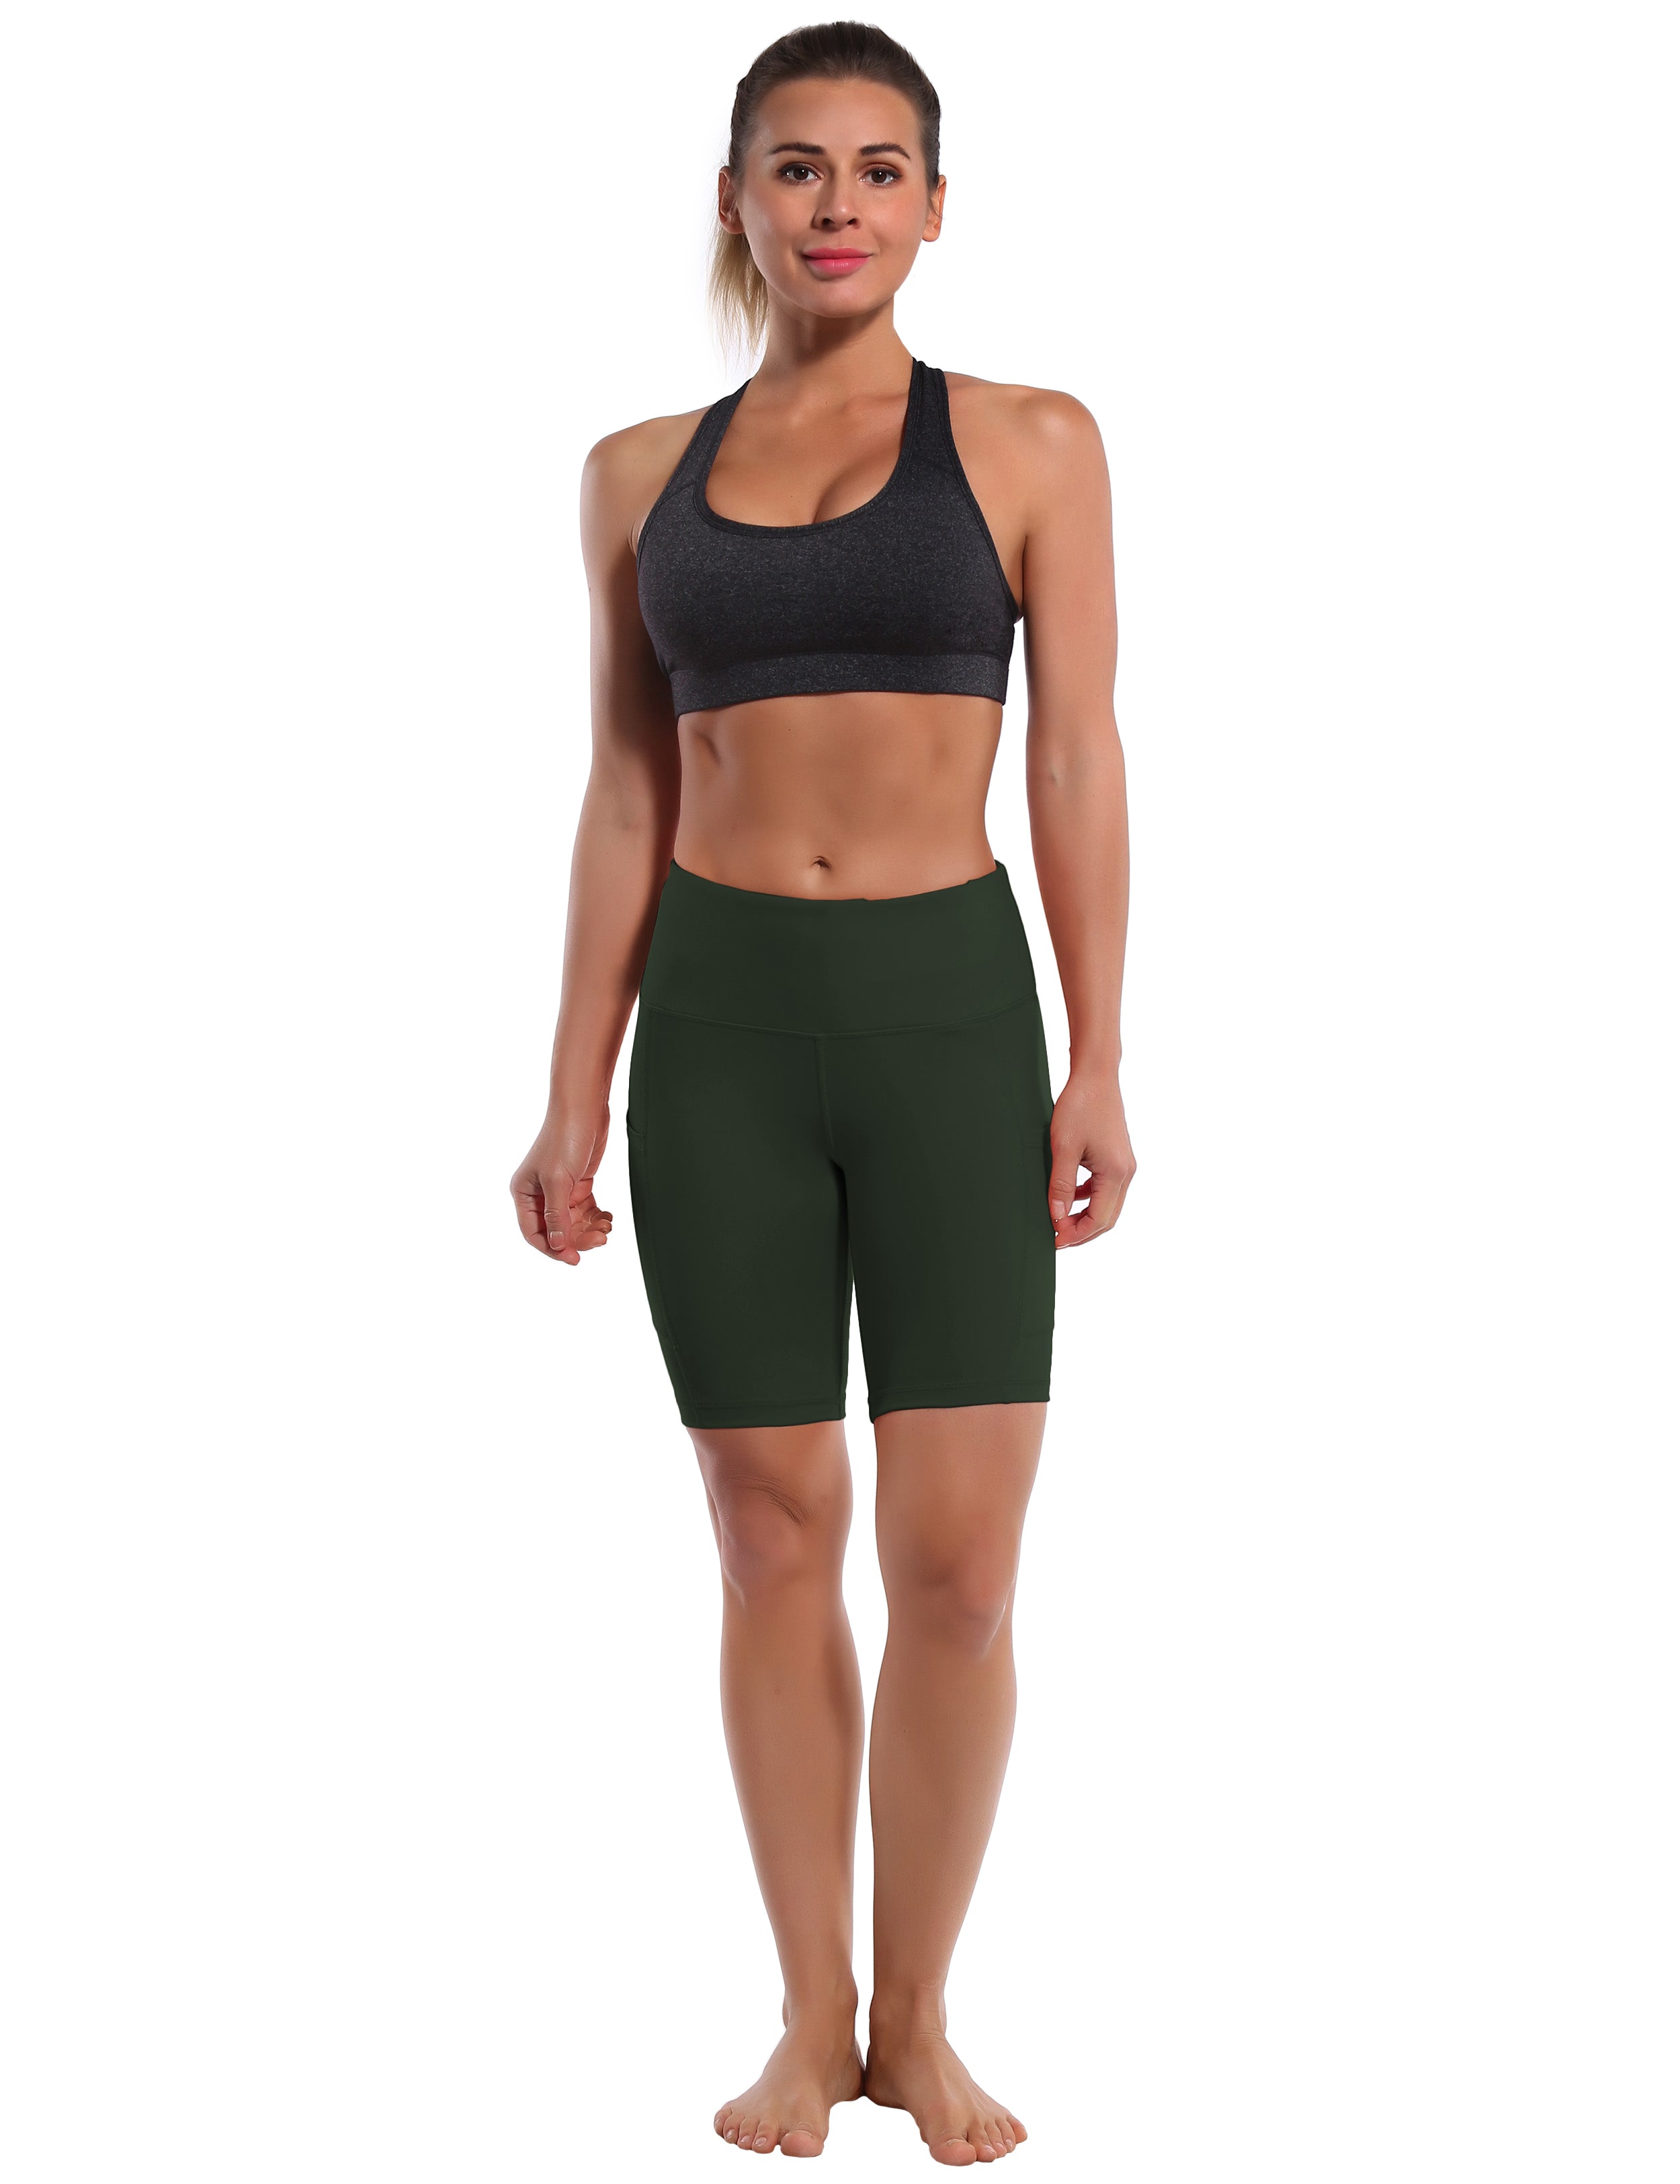 8" Side Pockets Yoga Shorts olivegray Sleek, soft, smooth and totally comfortable: our newest style is here. Softest-ever fabric High elasticity High density 4-way stretch Fabric doesn't attract lint easily No see-through Moisture-wicking Machine wash 75% Nylon, 25% Spandex